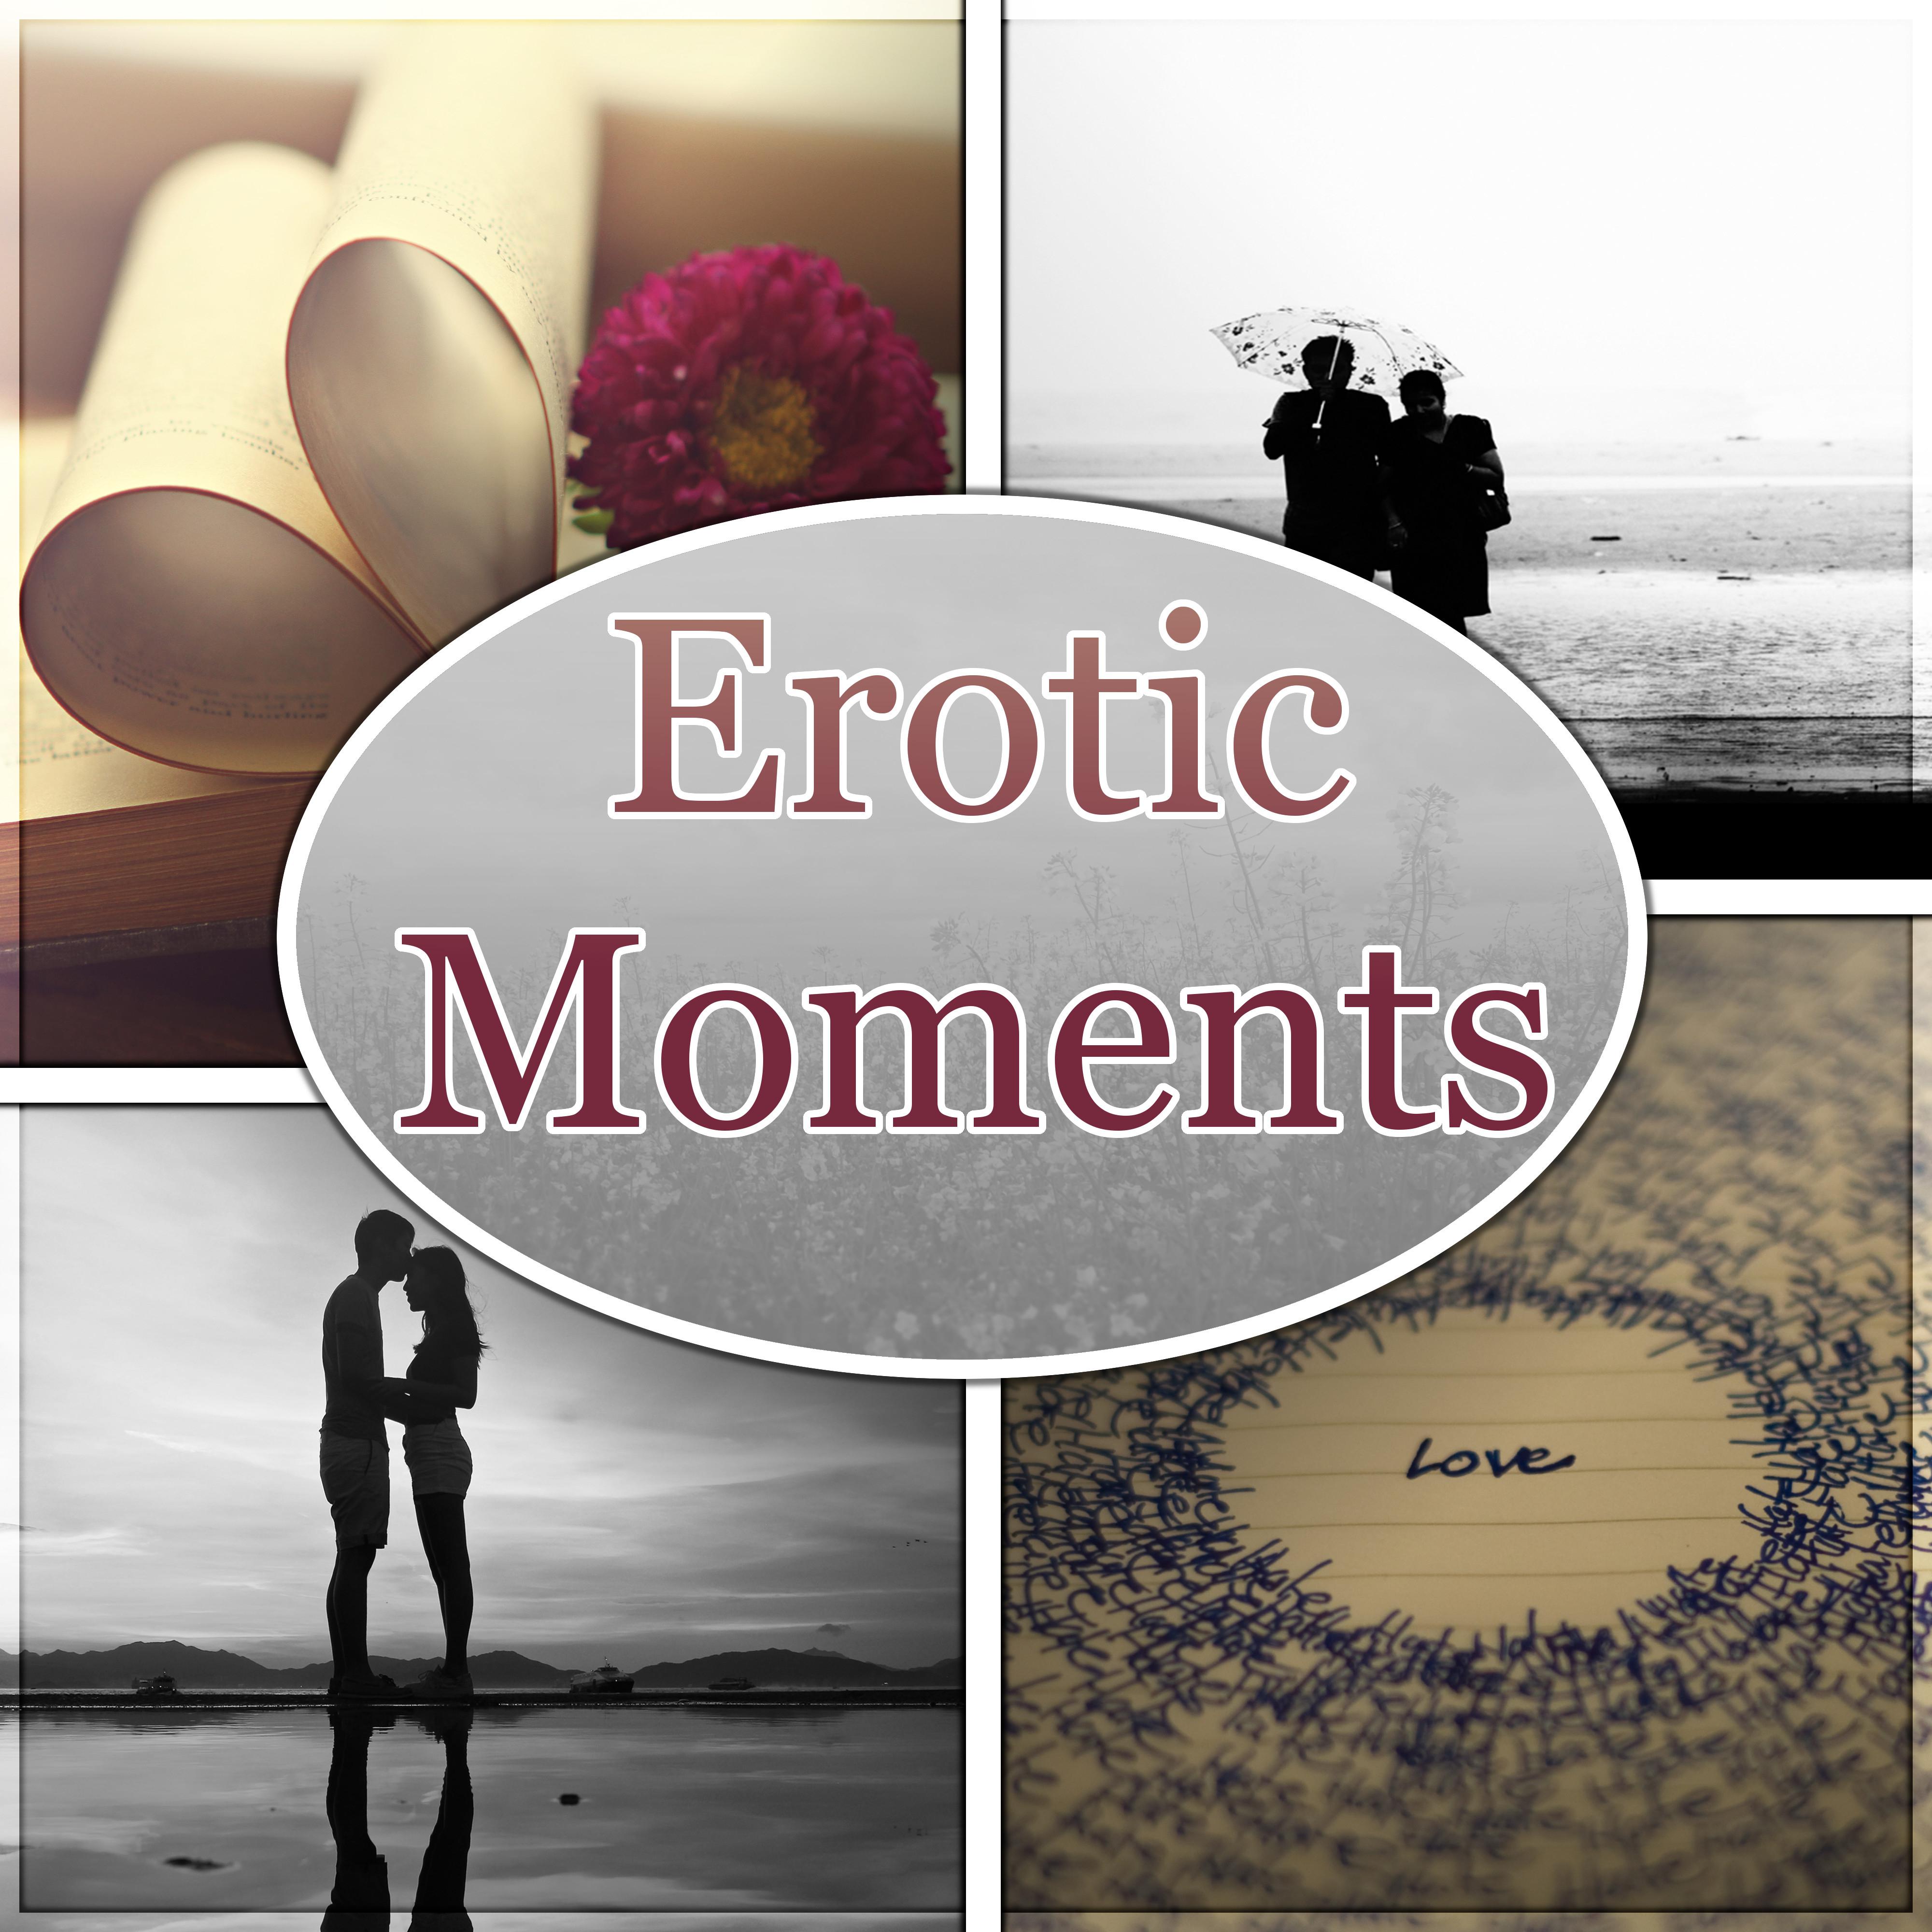 Erotic Moments - ****** Music, **** Instrumental Songs to Make Love, *** Soundtrack, Shades of Love